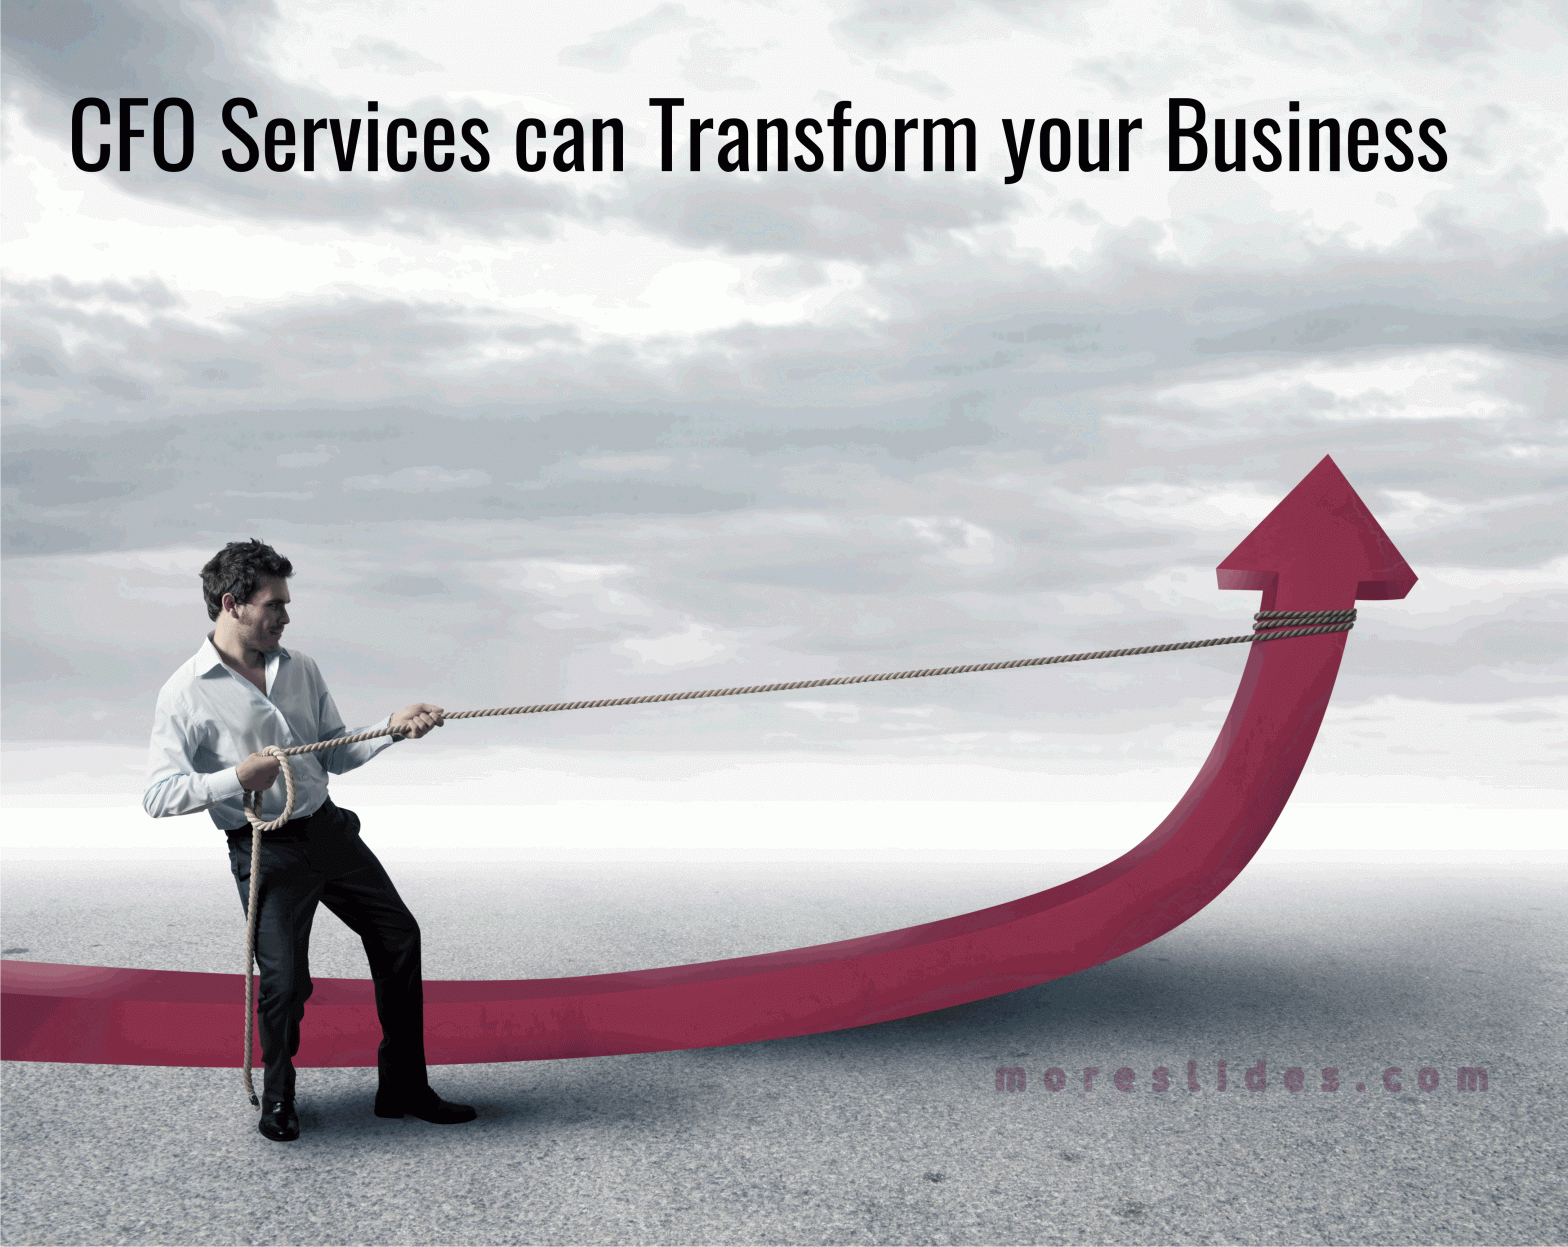 Getting CFO Services can Transform your Business